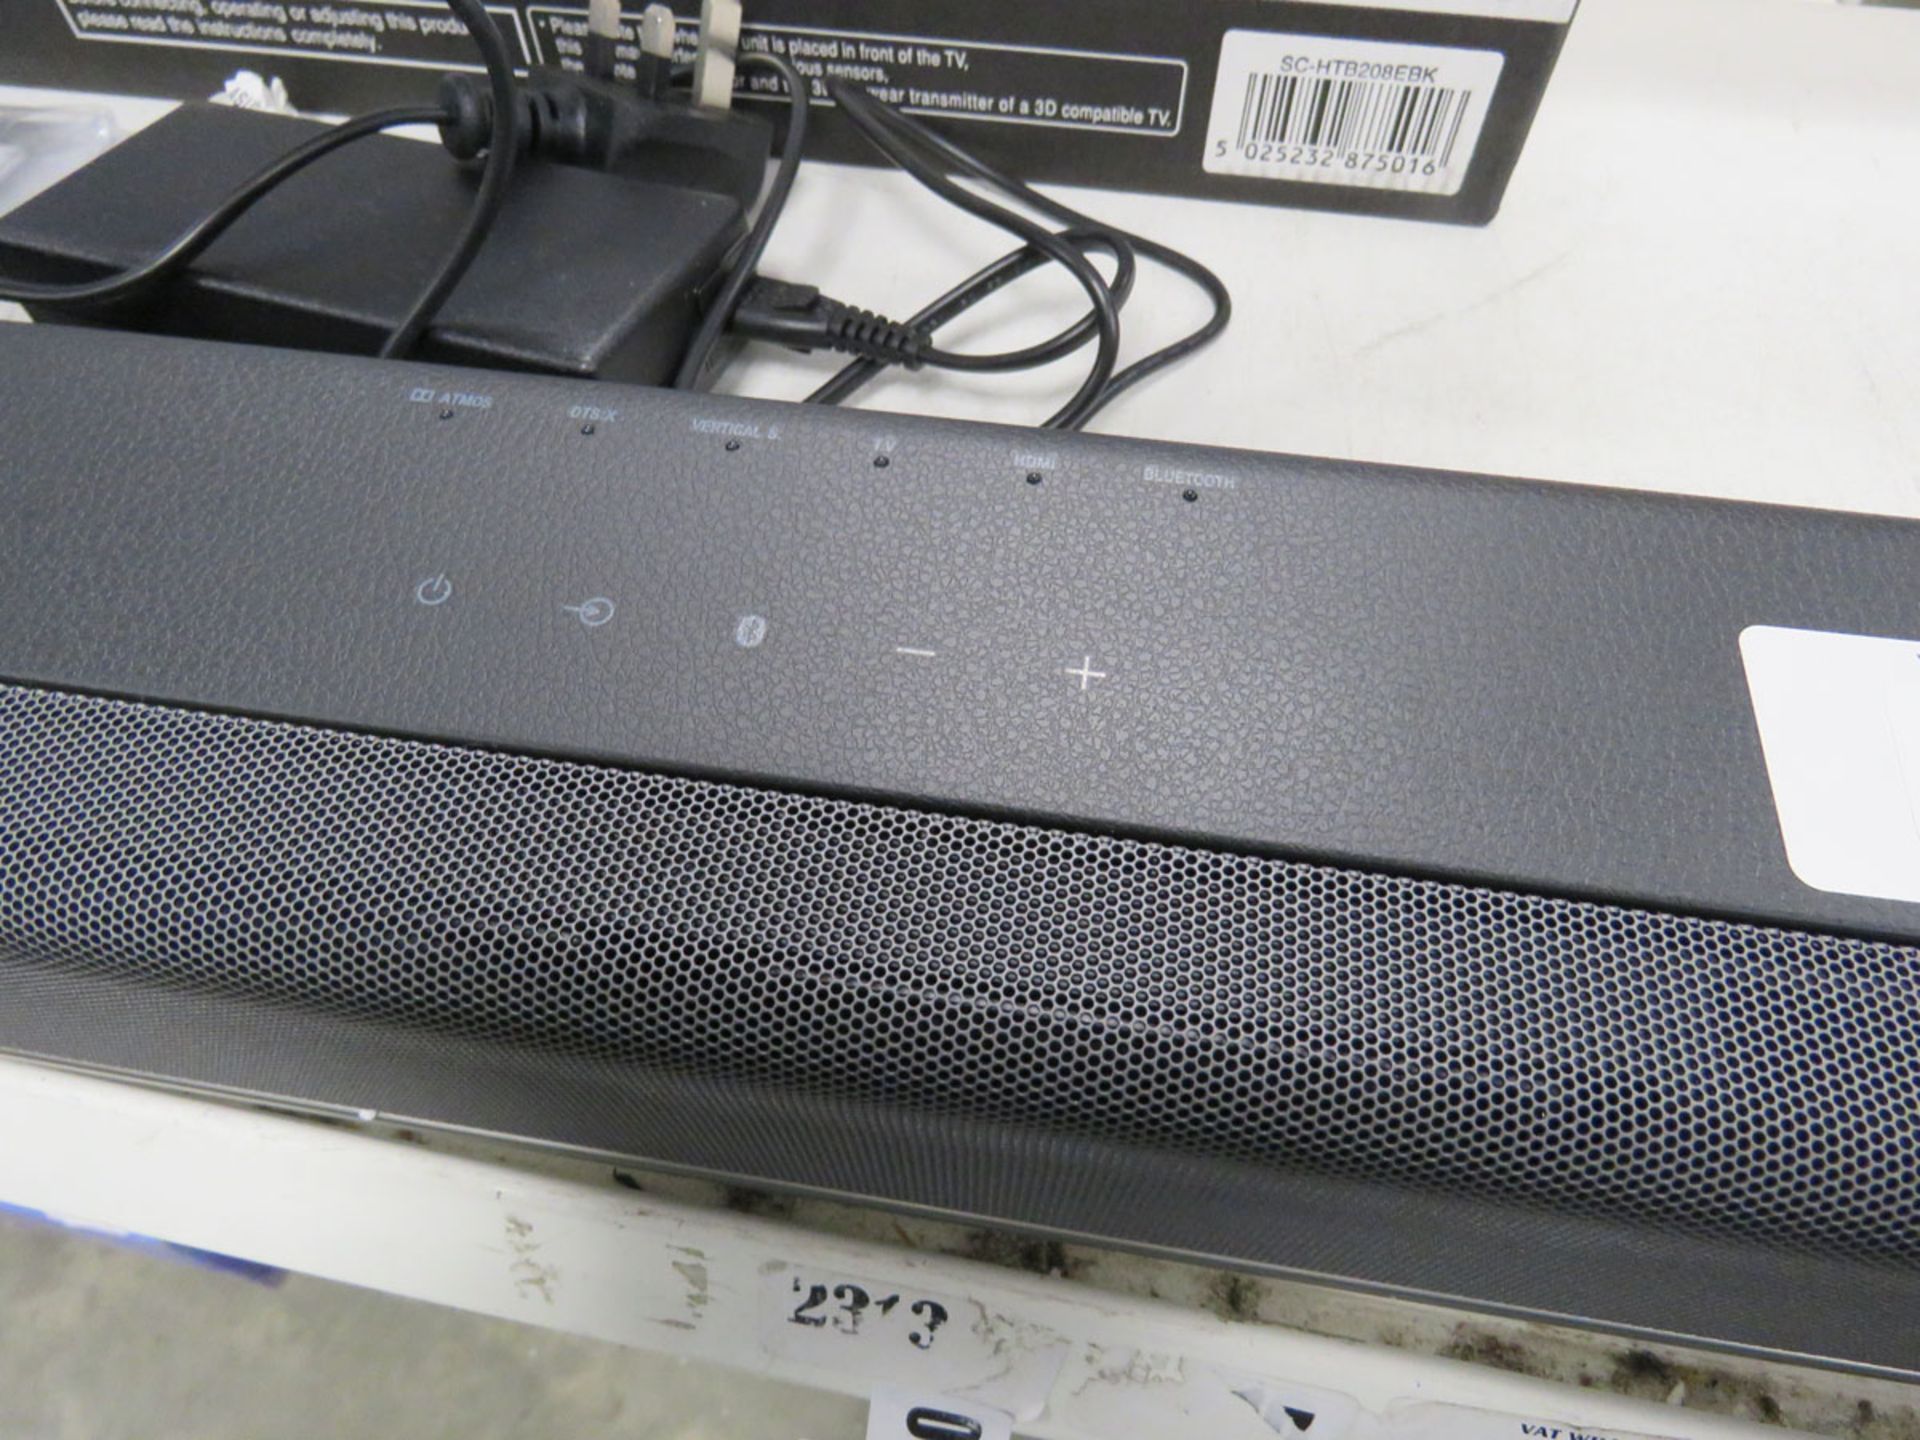 Sony Dolby Atmos soundbar model HT-X8500 with power supply, remote control and cabling No dents in - Image 2 of 2